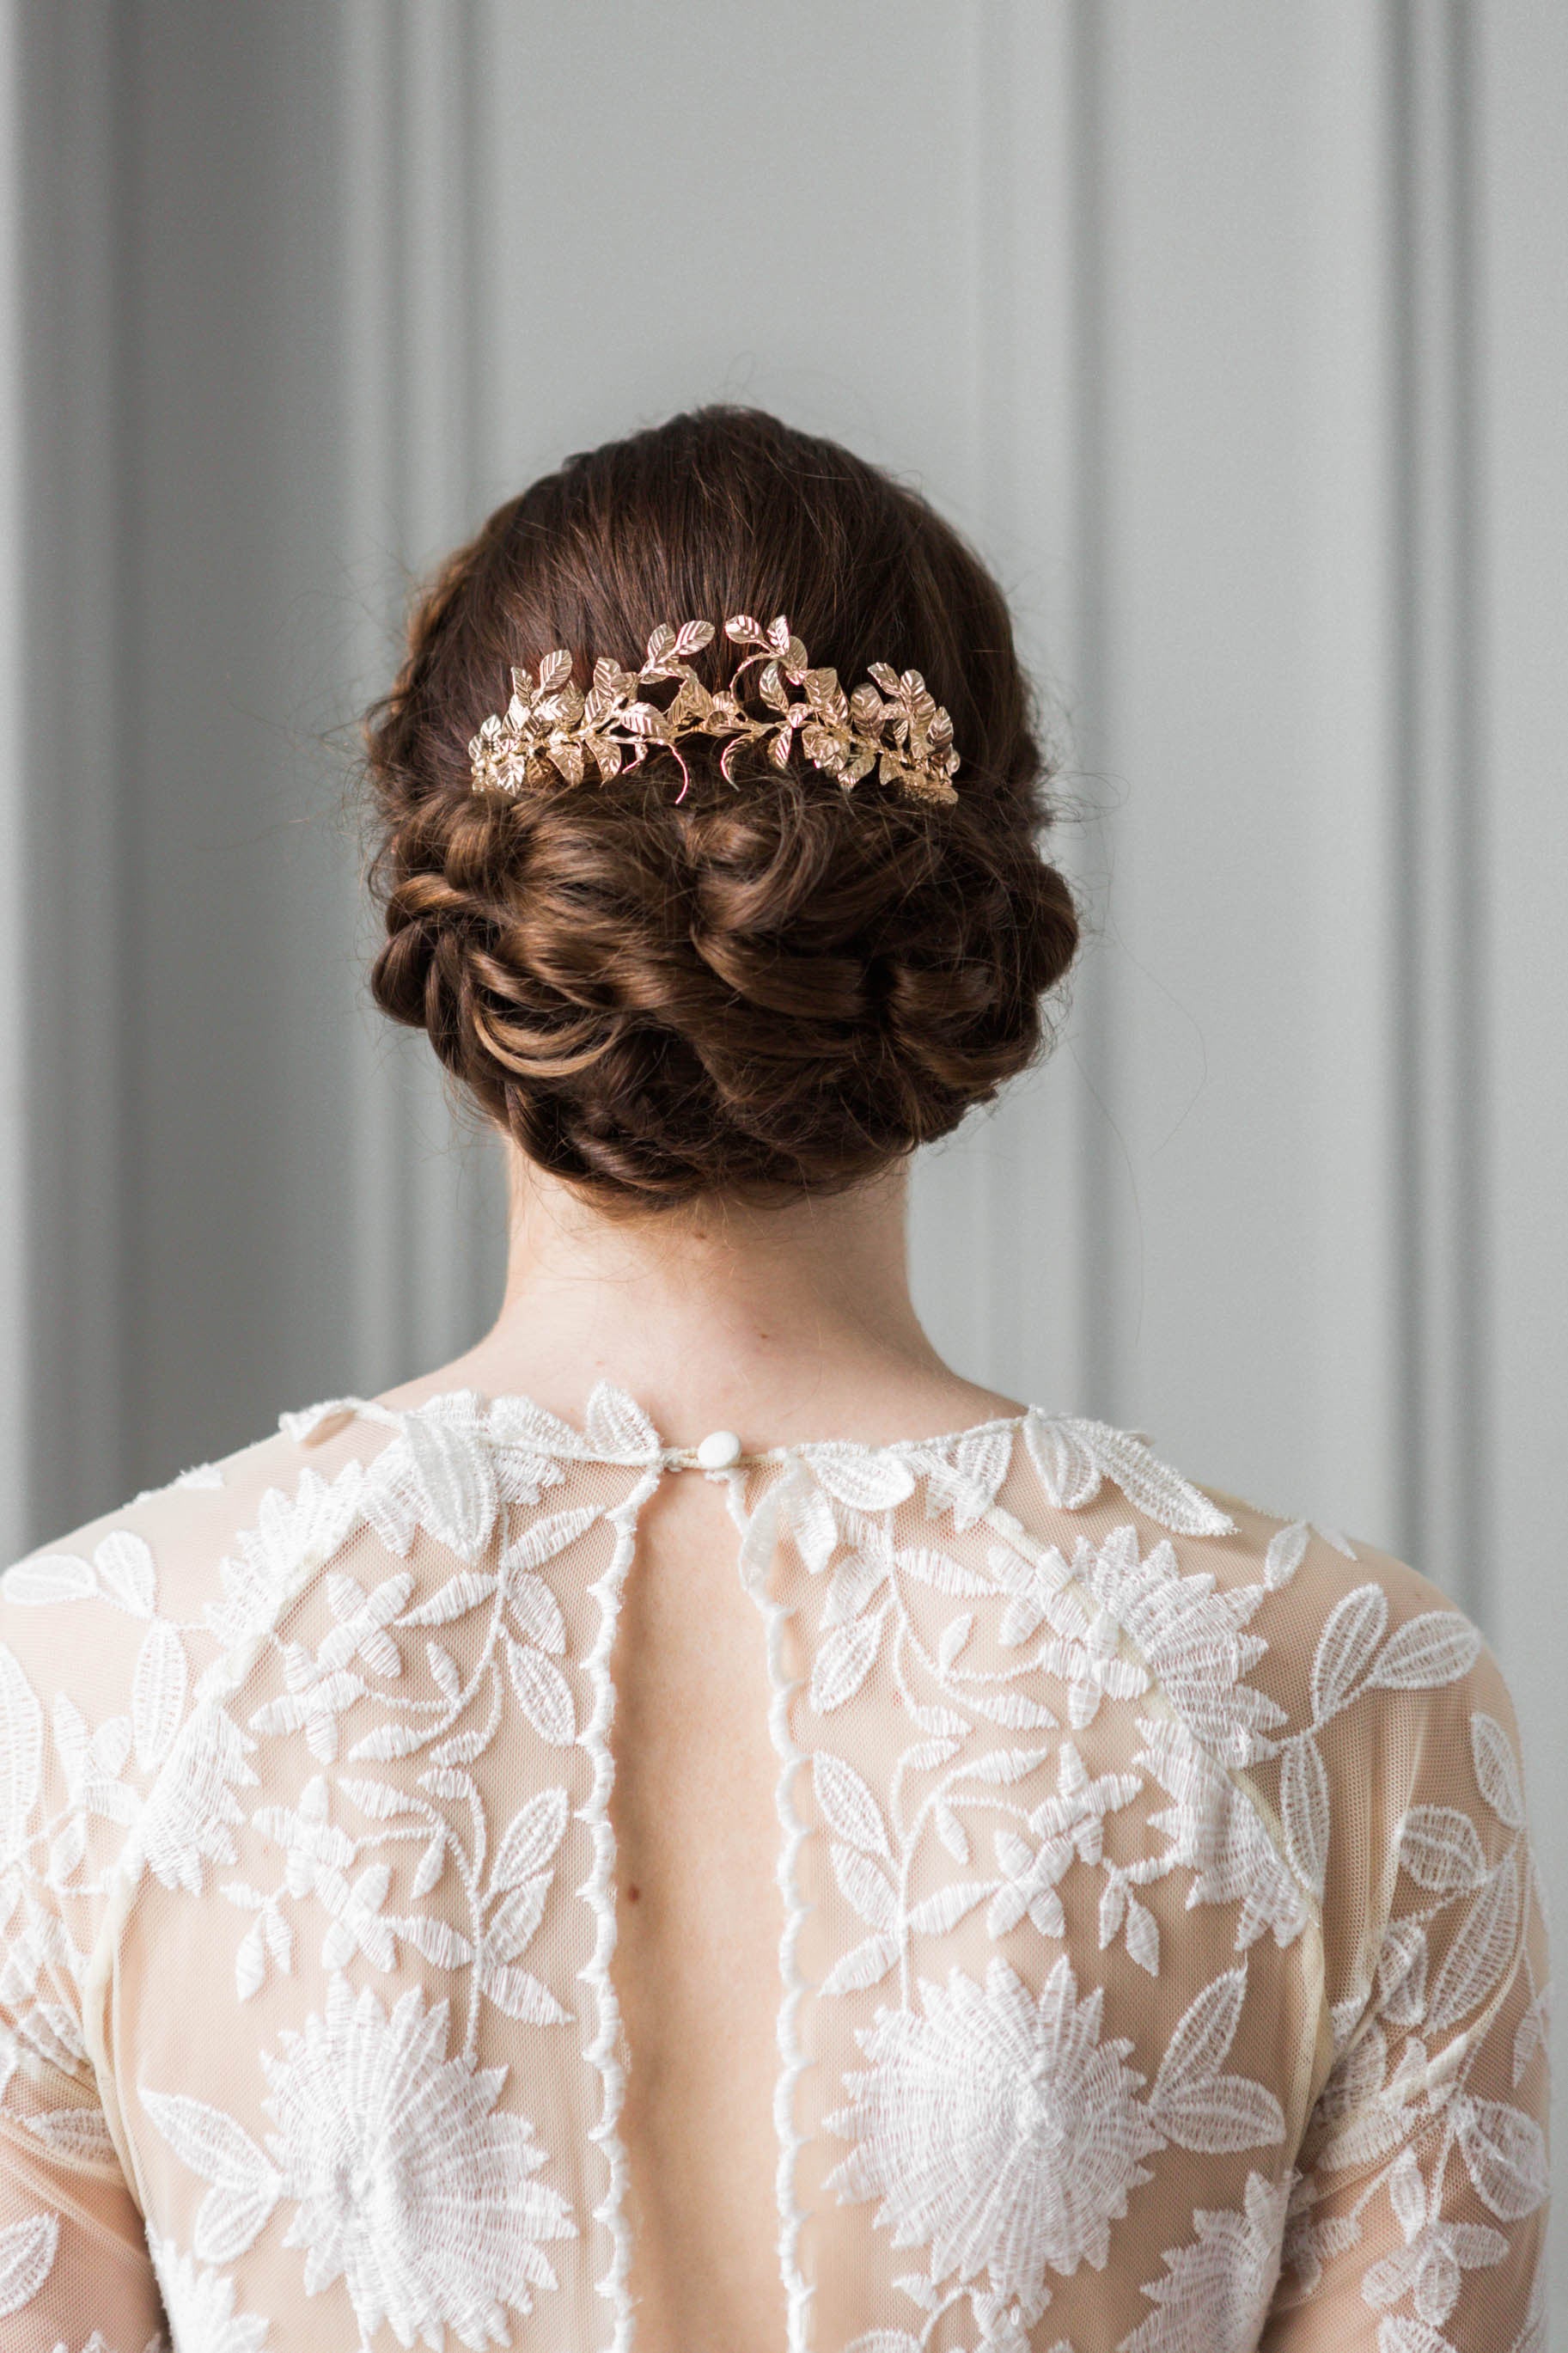 Summer Wedding Hair Inspiration | Bridal Hairstyles | Lace & Favour